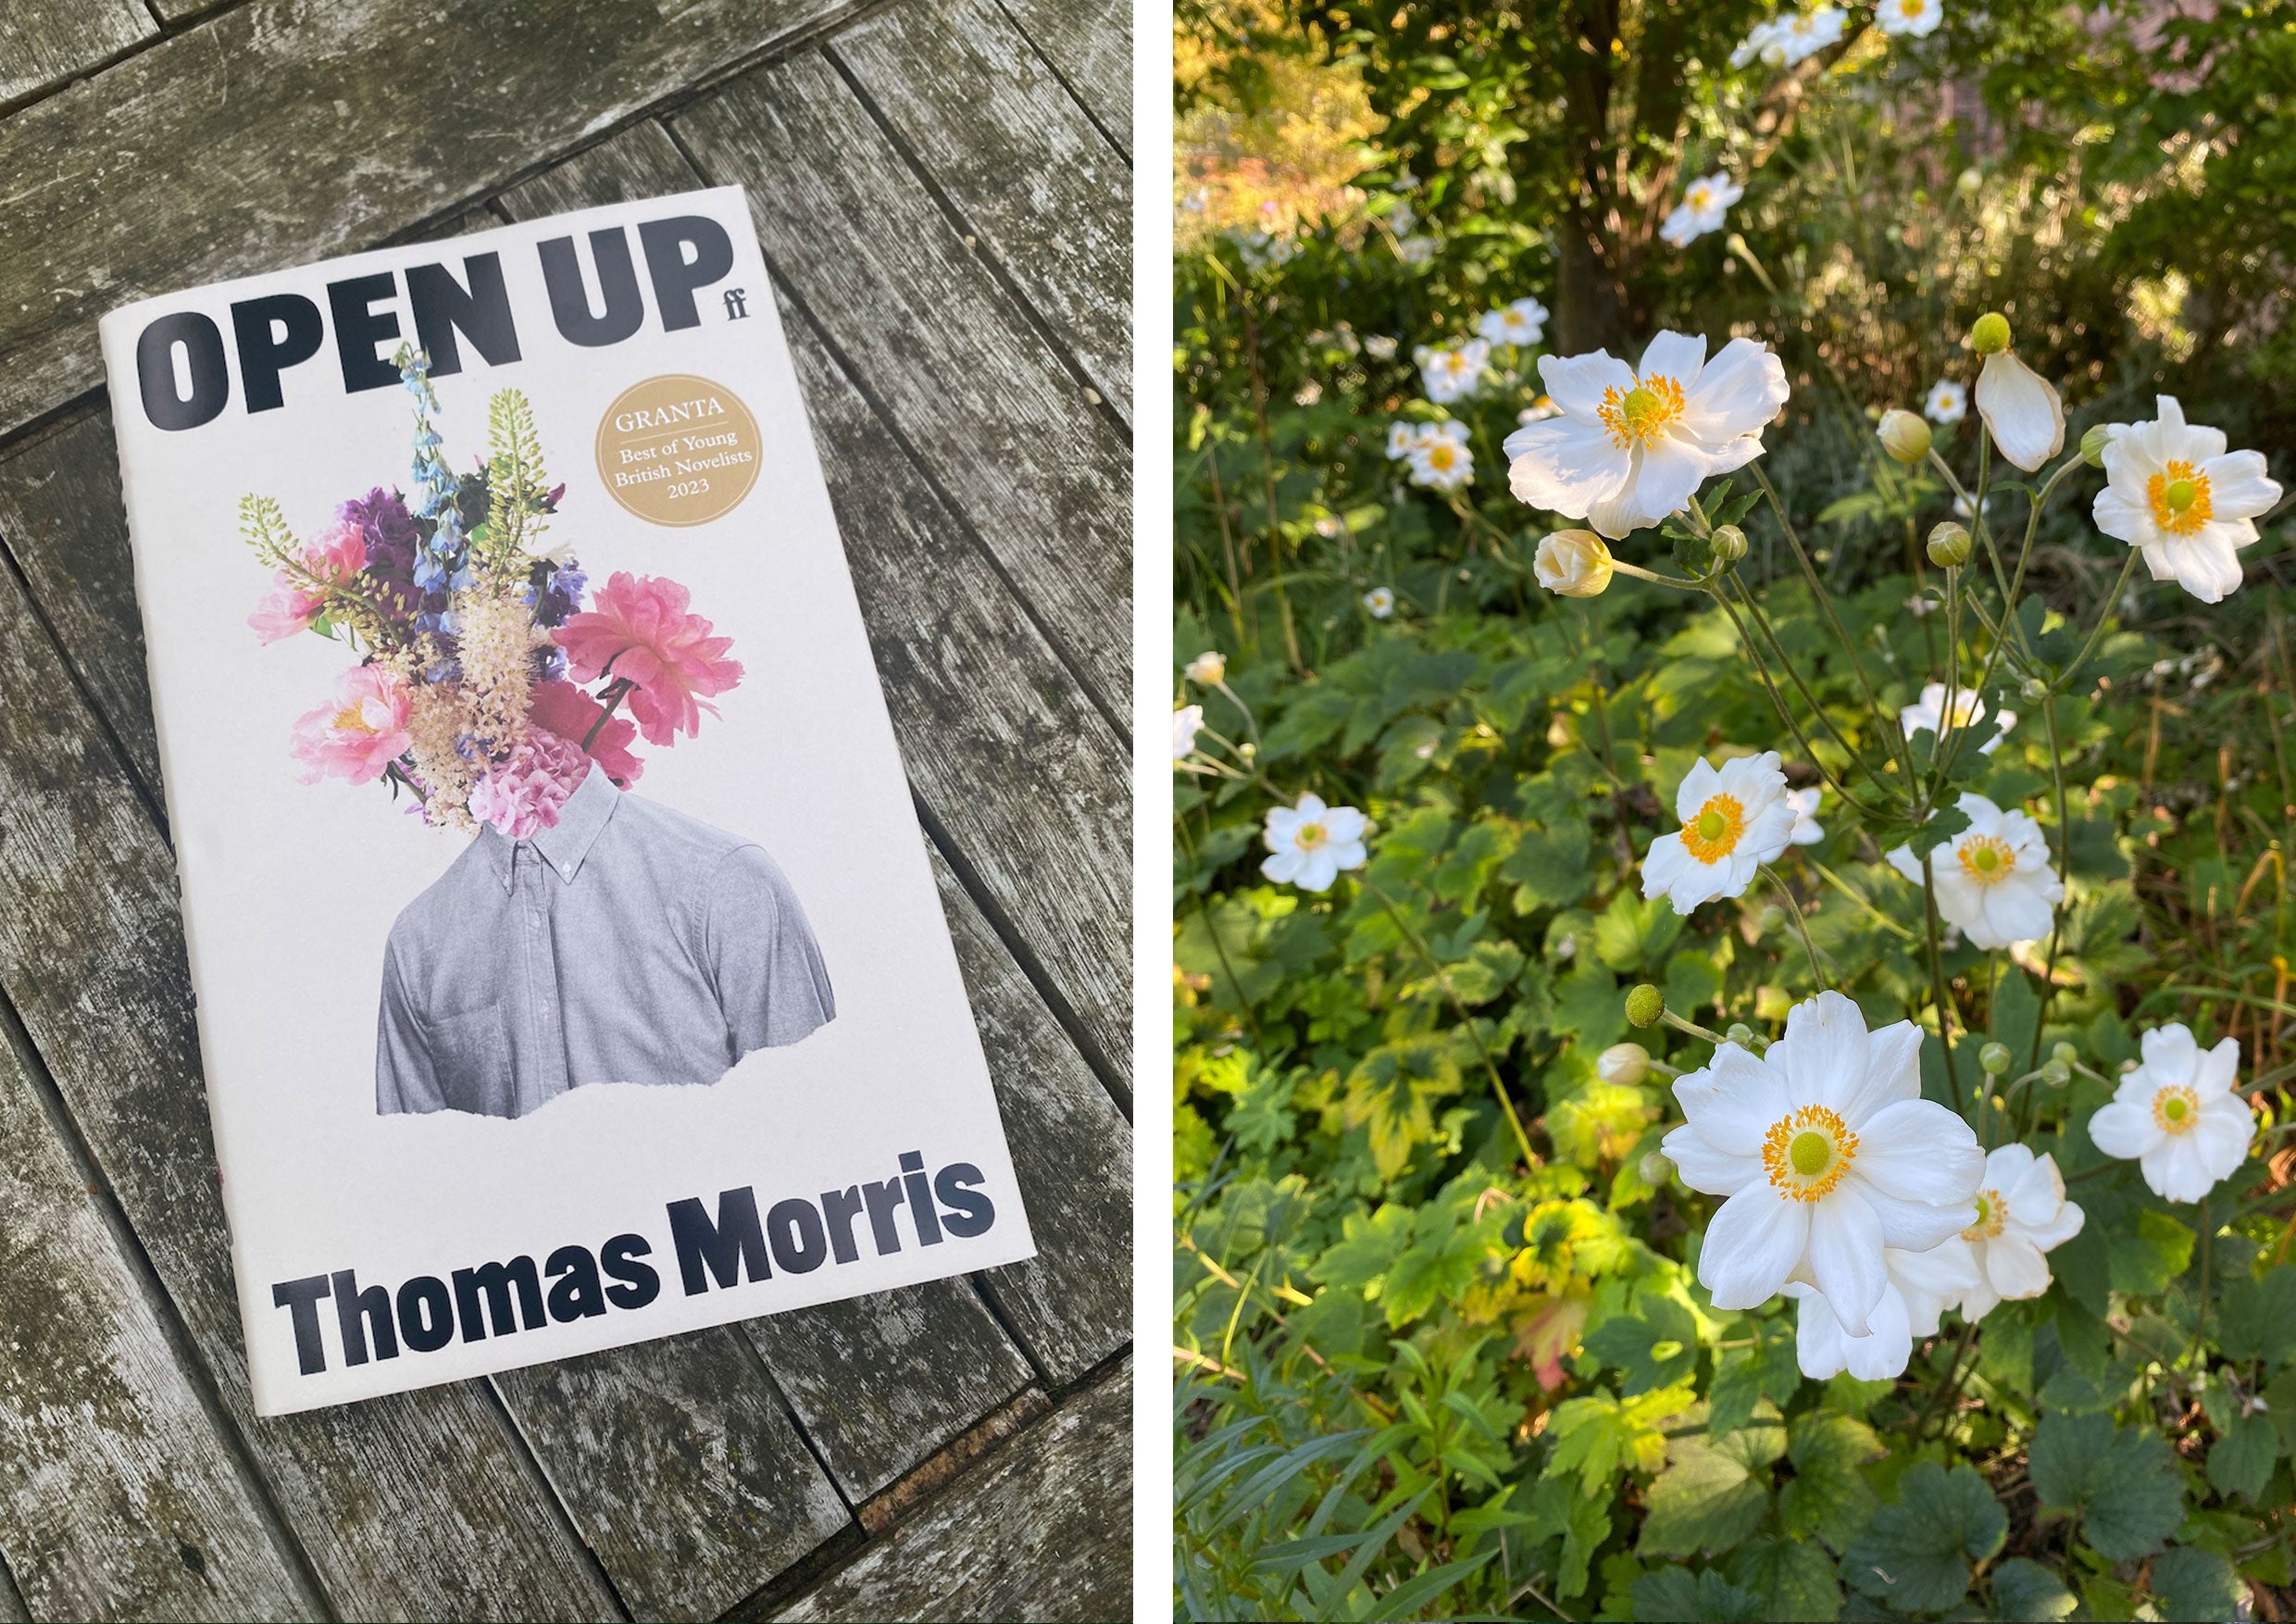 Open Up Thomas Morris book and anemone flowers